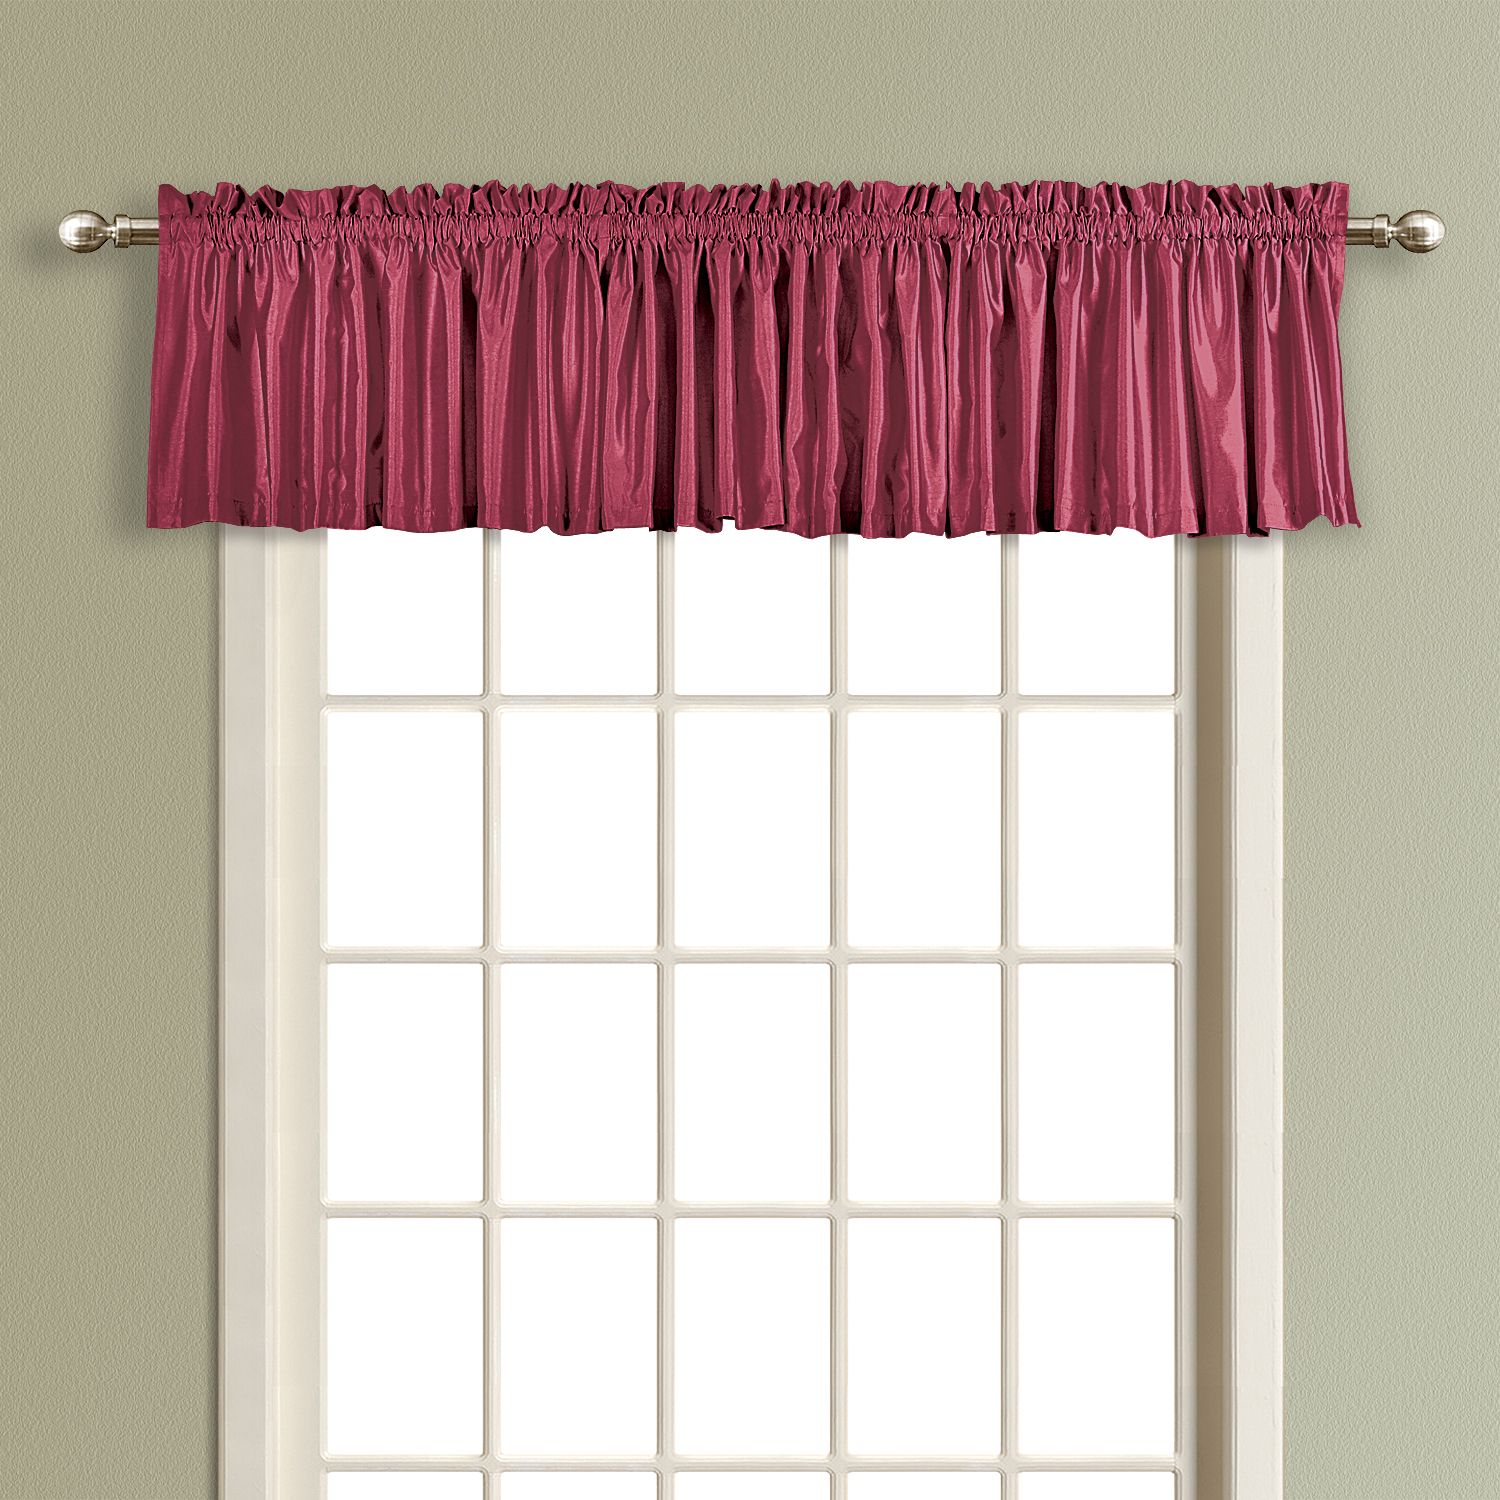 United Curtain Company Anna 54" X 16" faux silk straight valance available in multiple colors